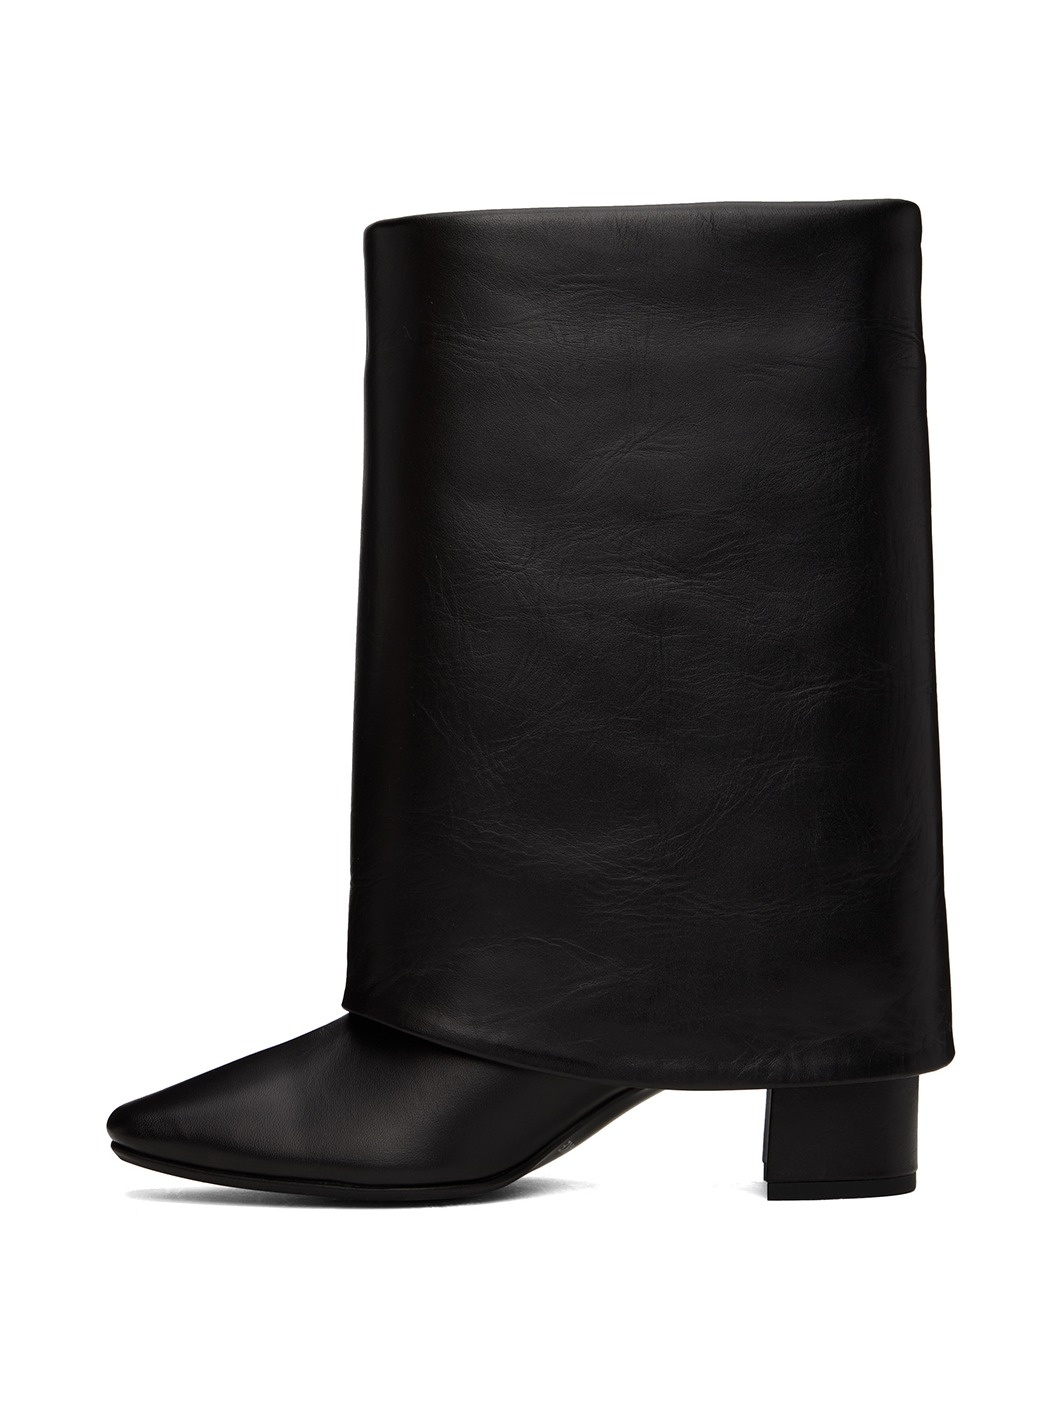 Black Cover Boots - 3